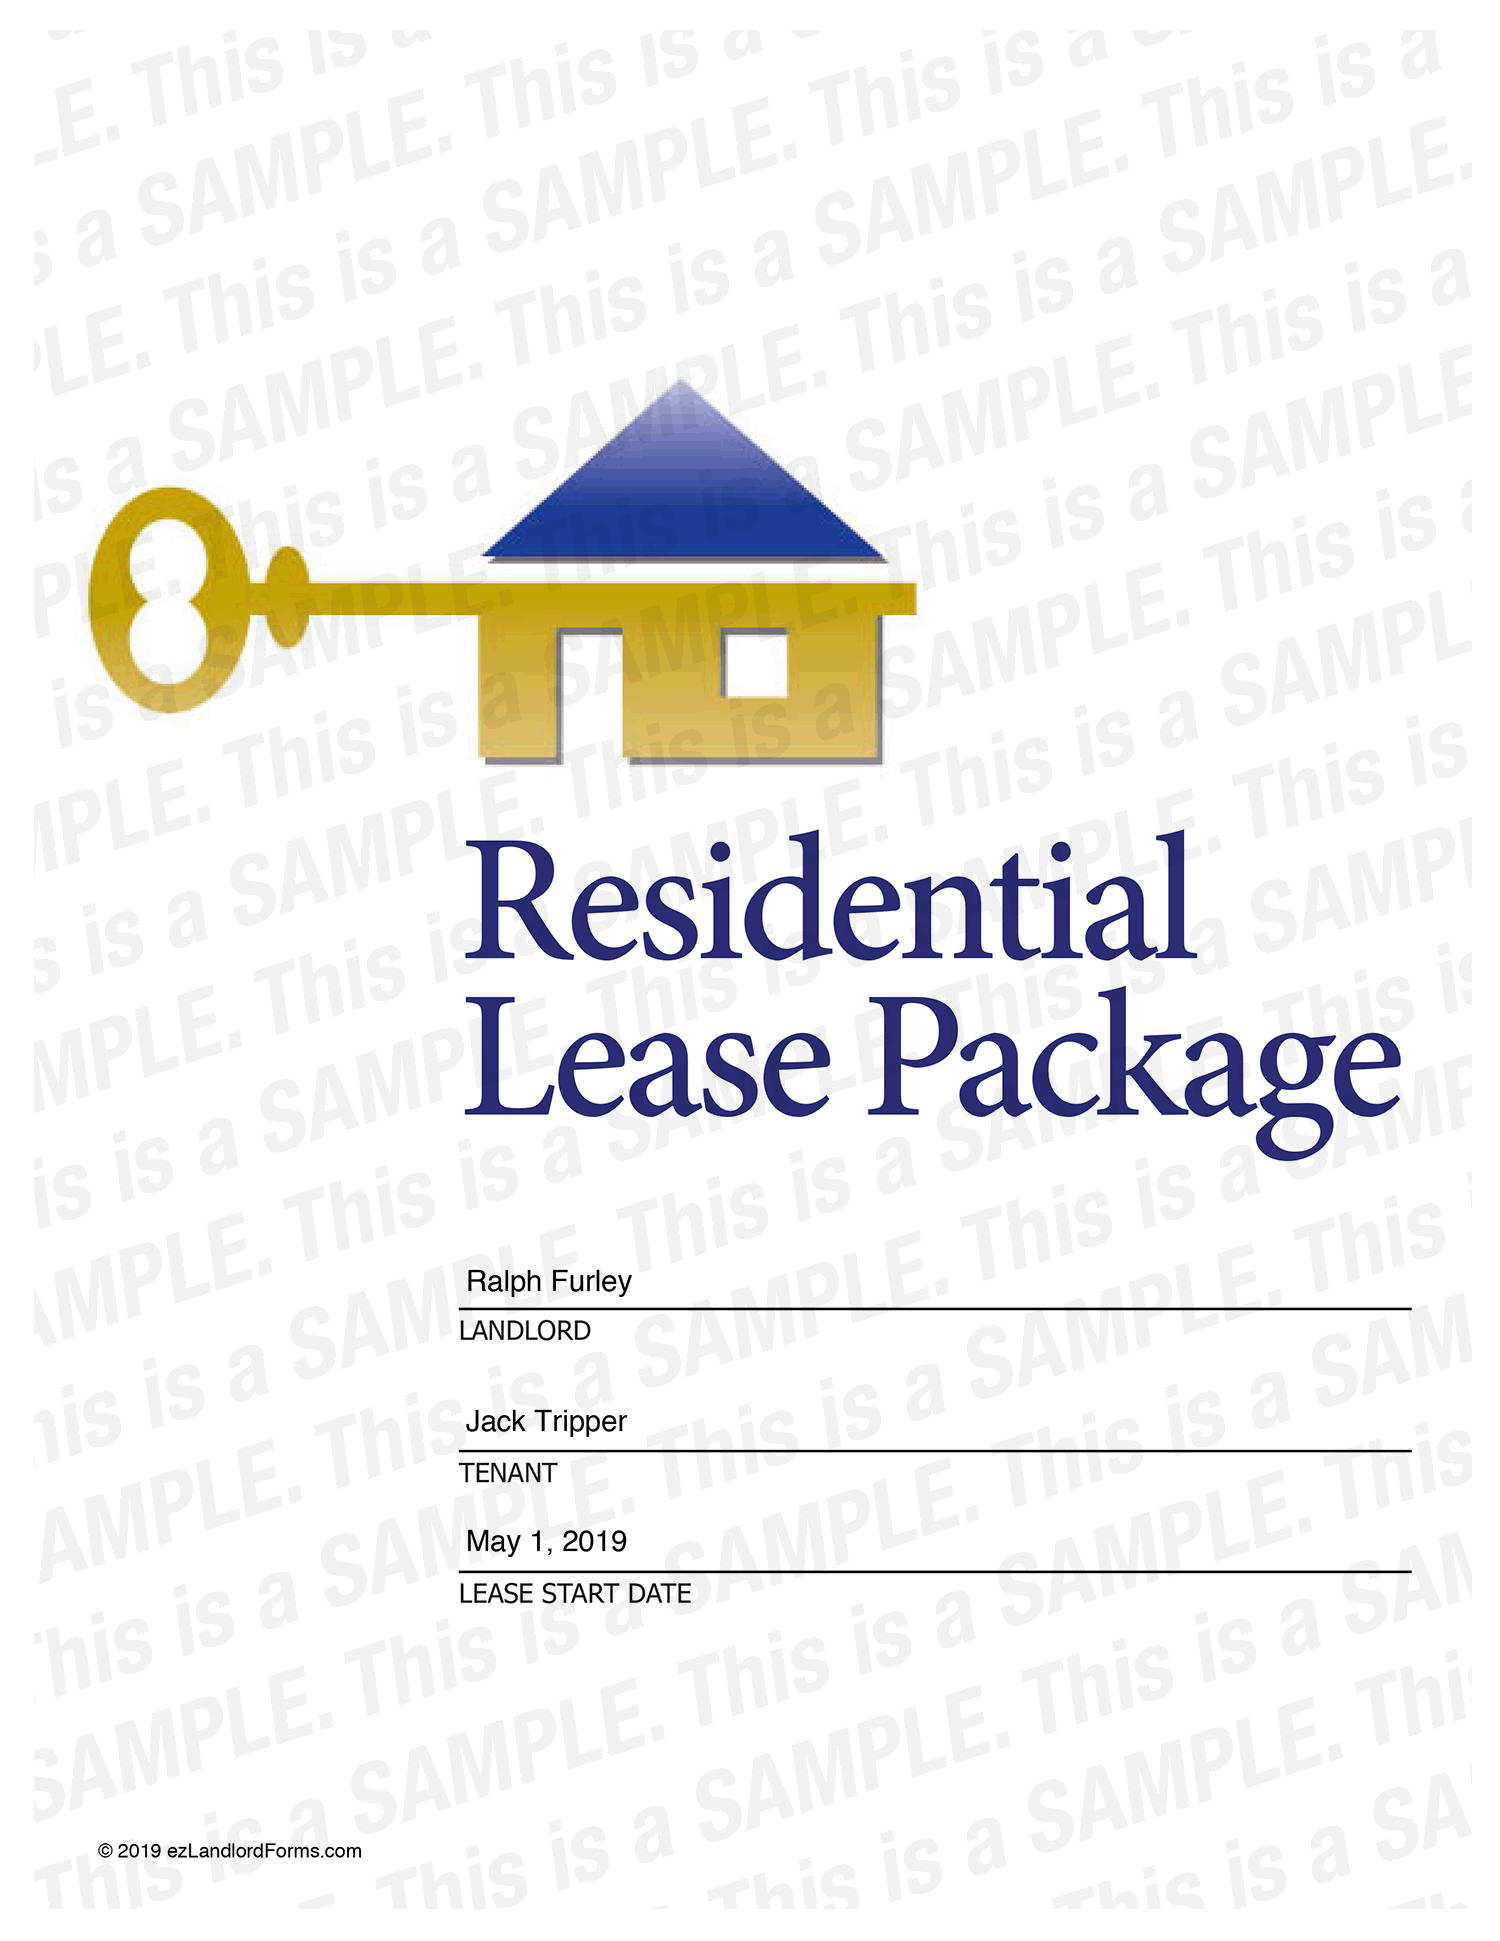 Colorado Residential Lease Agreement Colorado Lease Agreement With Esign Ezlandlordforms